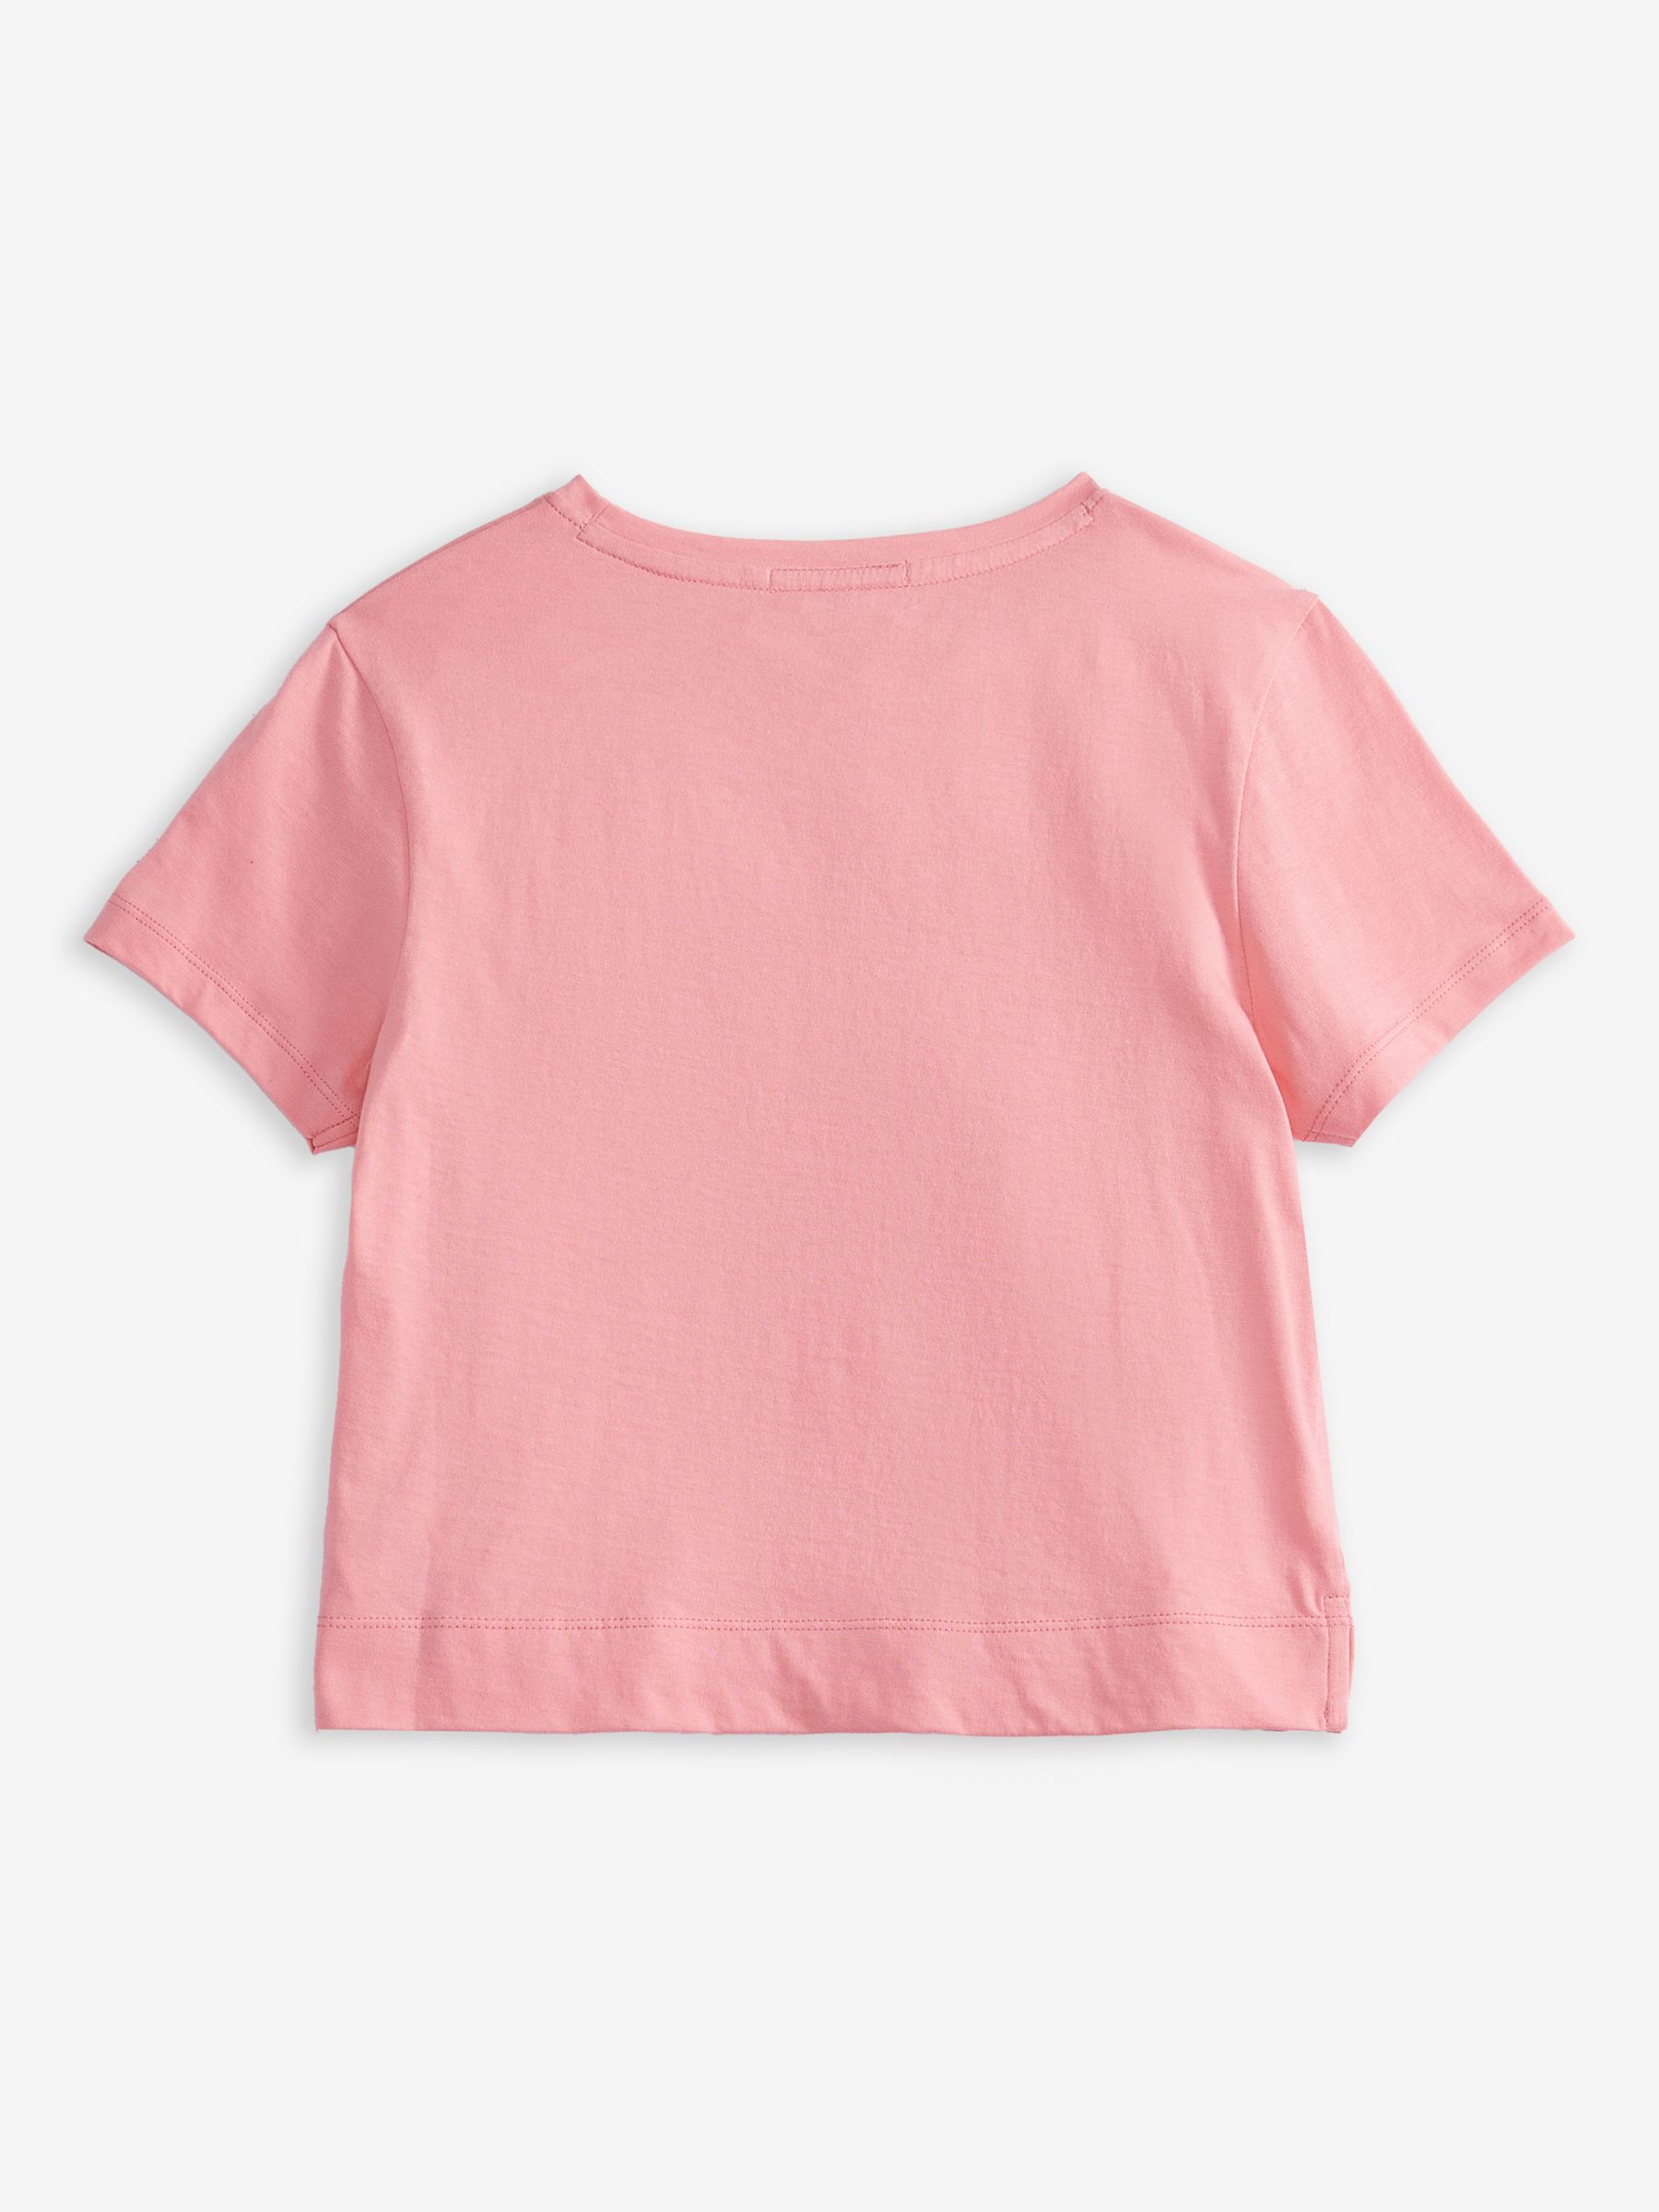 Barbour Kids' Annabelle T-Shirt, Pink, S